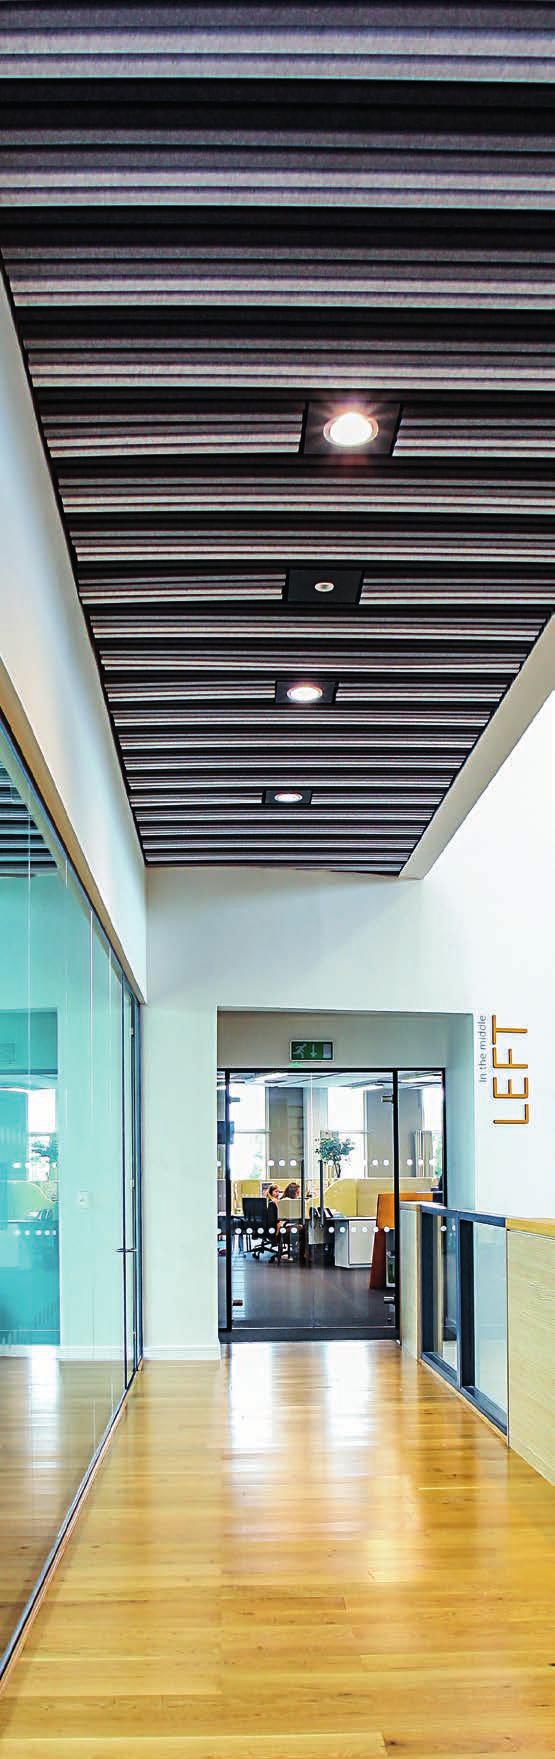 SUSTAINABLE FEATURES Ceilings as a sustainability standard The linear felt ceiling panels that comprise HeartFelt are made of non-woven, thermoformed PES fibers.